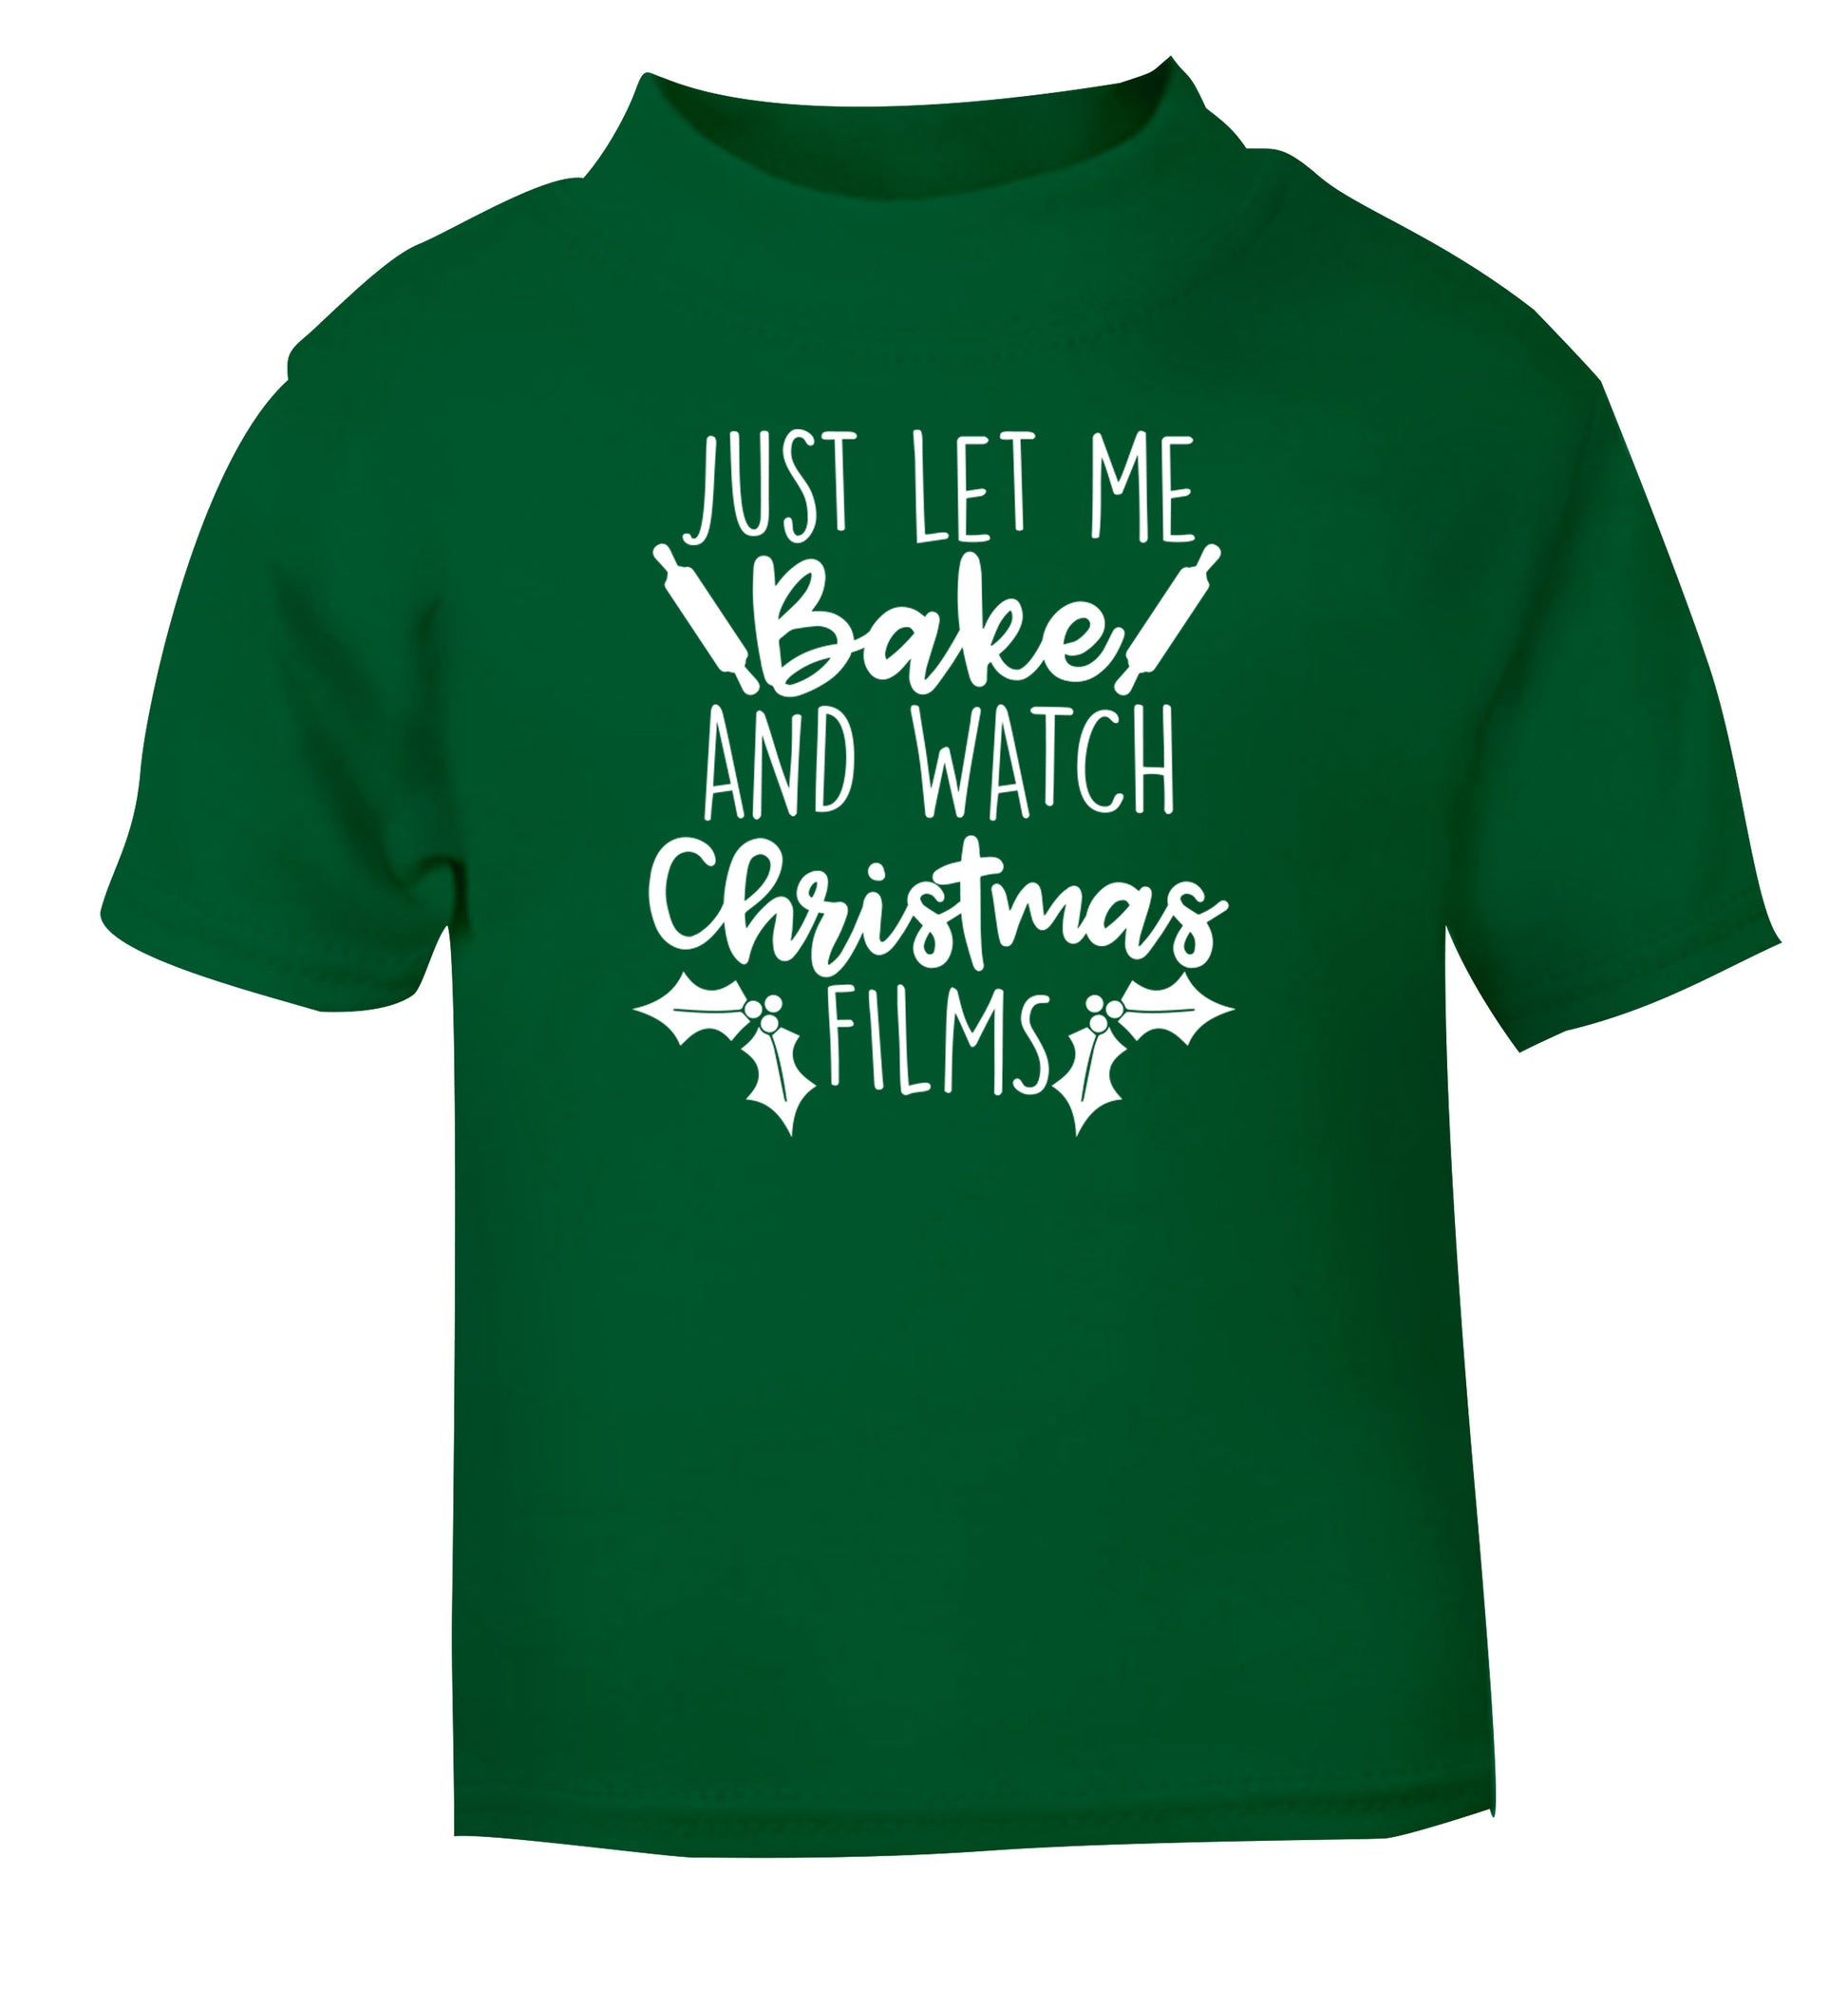 Just let me bake and watch Christmas films green Baby Toddler Tshirt 2 Years